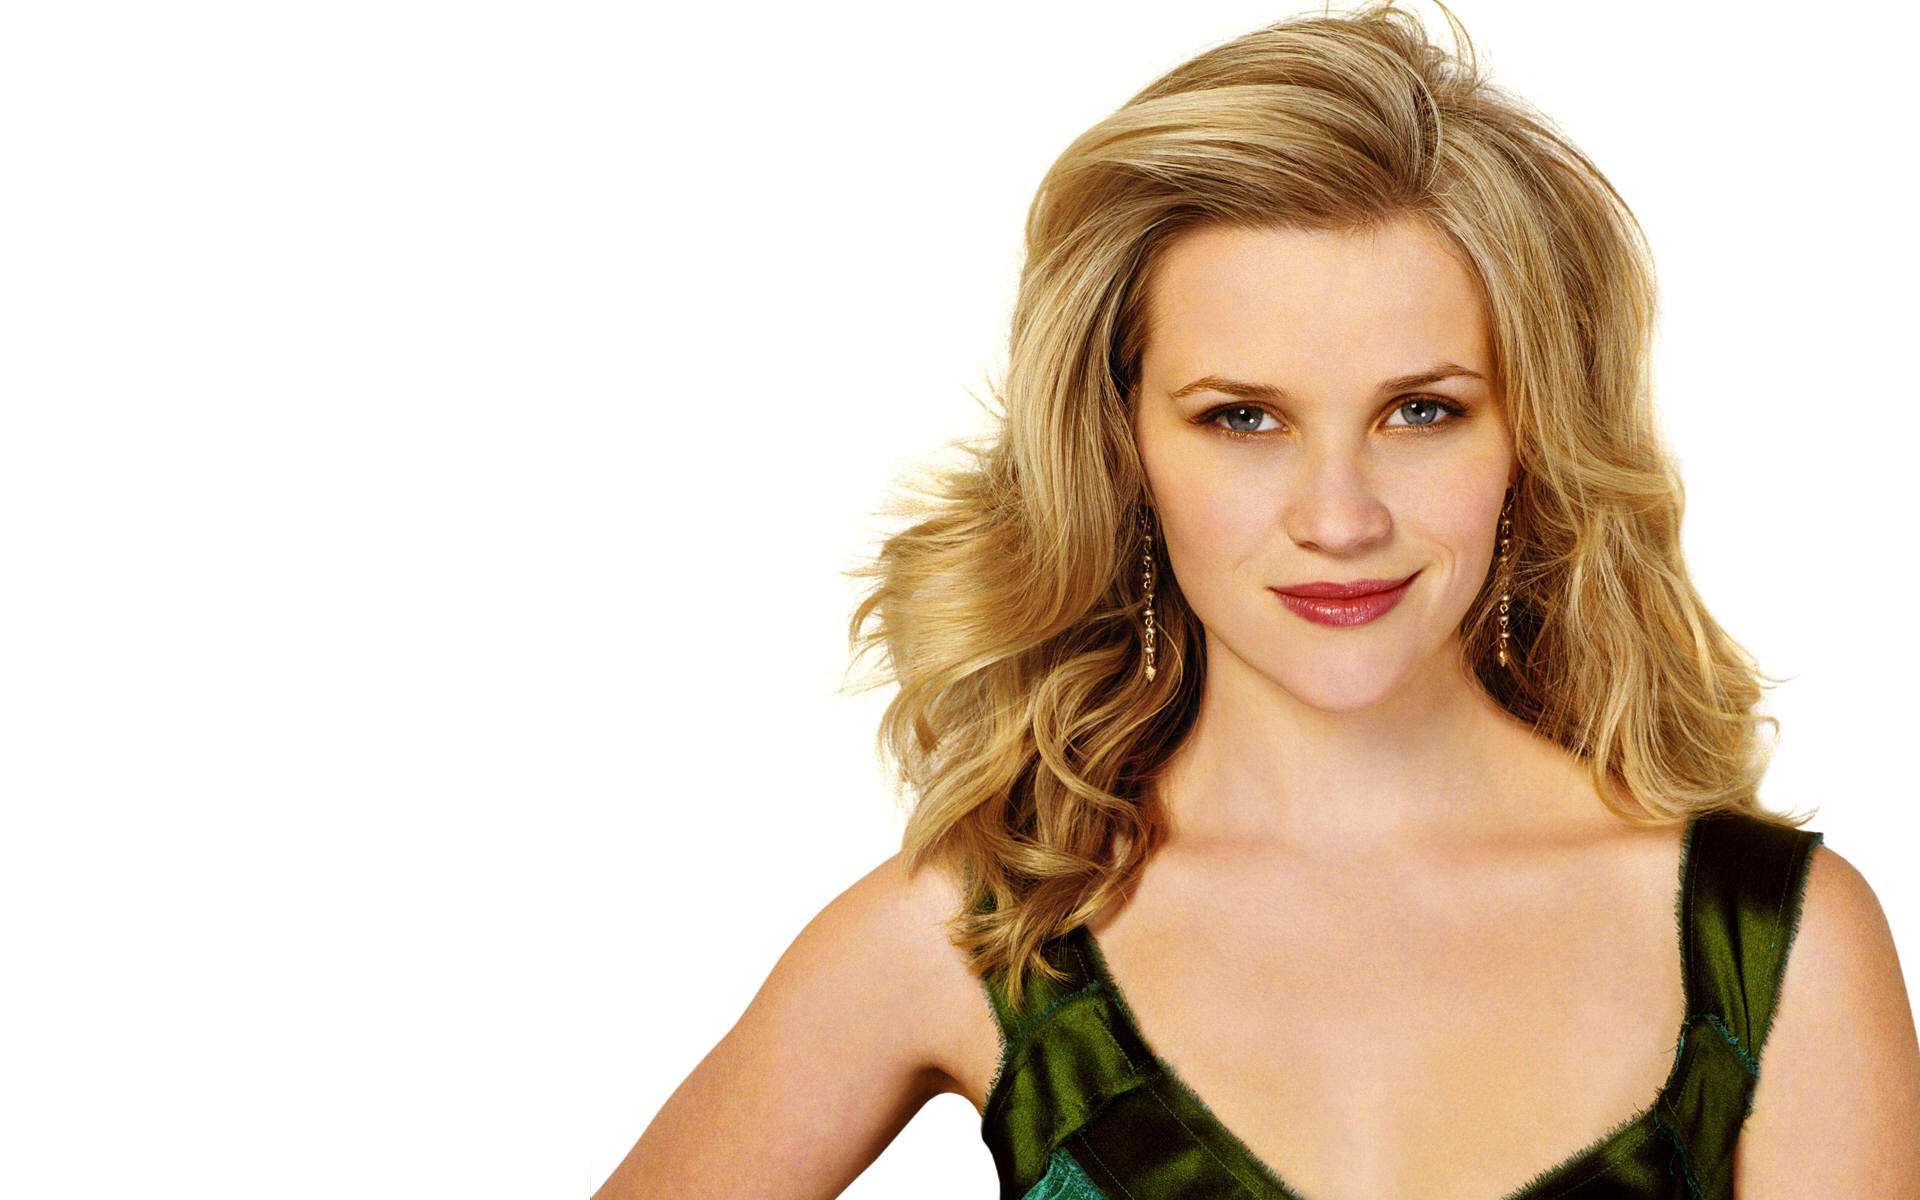 Reese Witherspoon Wallpaper High Definition High Quality Widescreen